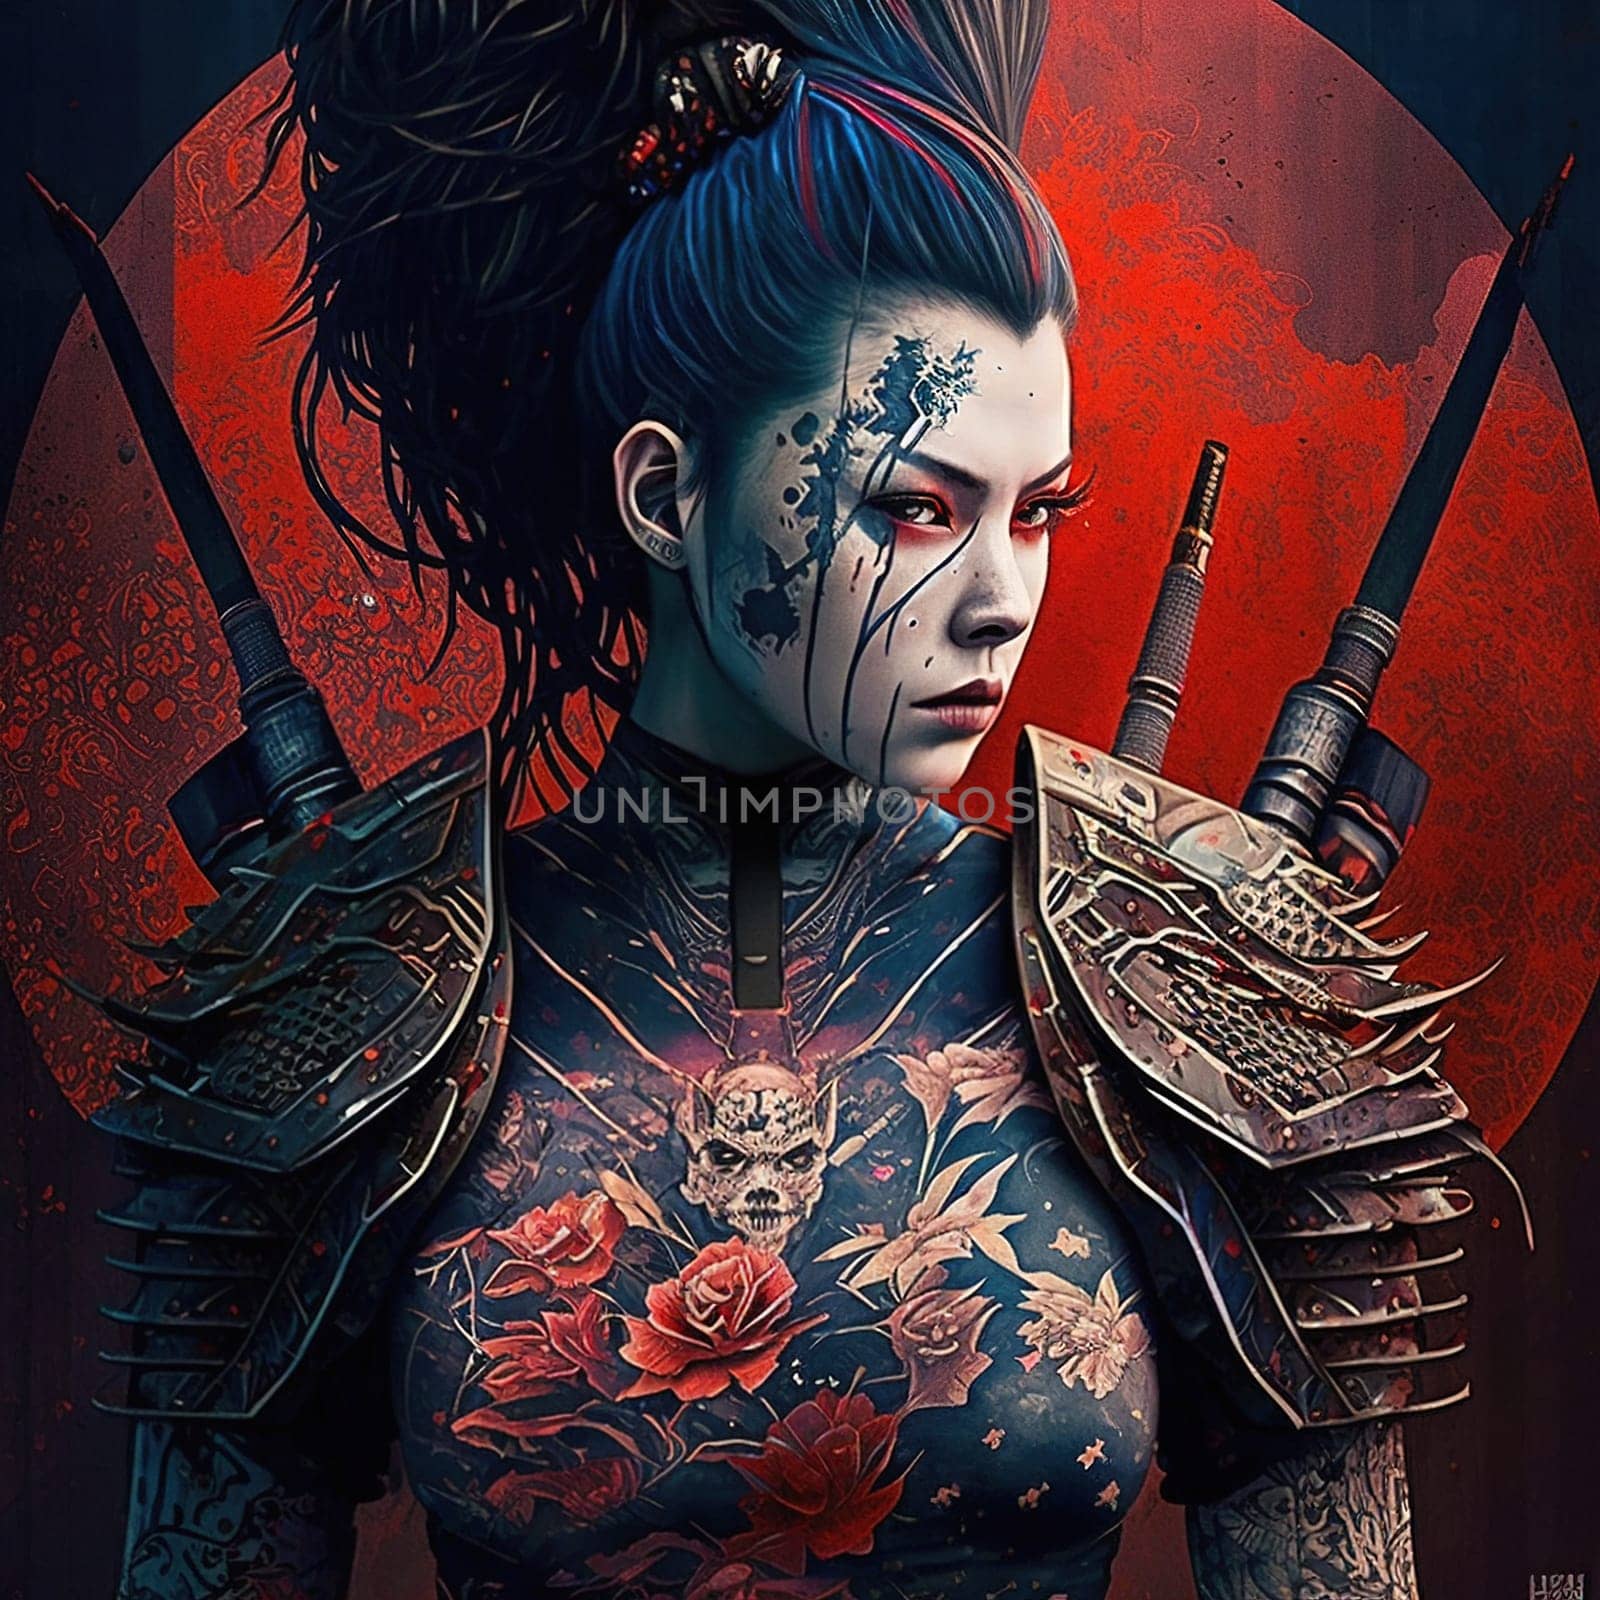 Captivating Cyberpunk Japanese Woman Adorned in Full Yakuza Bodysuit Tattoo with a Samurai Sword Against a Vibrant Red Sky with Influences of Traditional Geisha Culture illustration